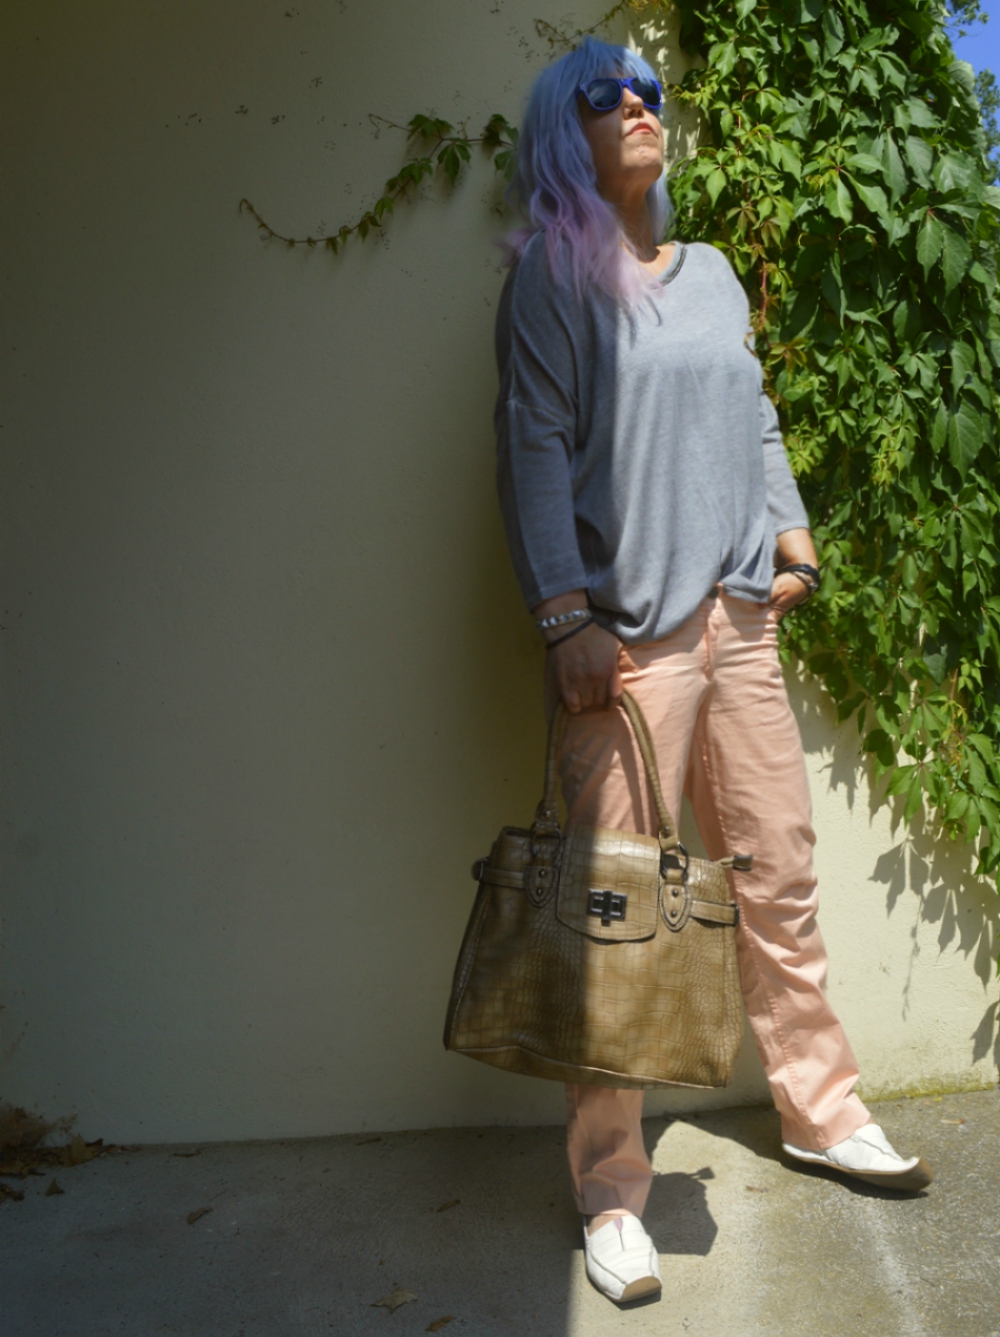 Apricot Summer Day Outfit -  Summer Outfit with pastel apricot Jeans, grey Jumper  and white Leather Loafers - posted by Annie K, Fashion and Lifestyle Blogger, Founder, CEO and writer of ANNIES BEAUTY HOUSE - a german fashion and beauty blog